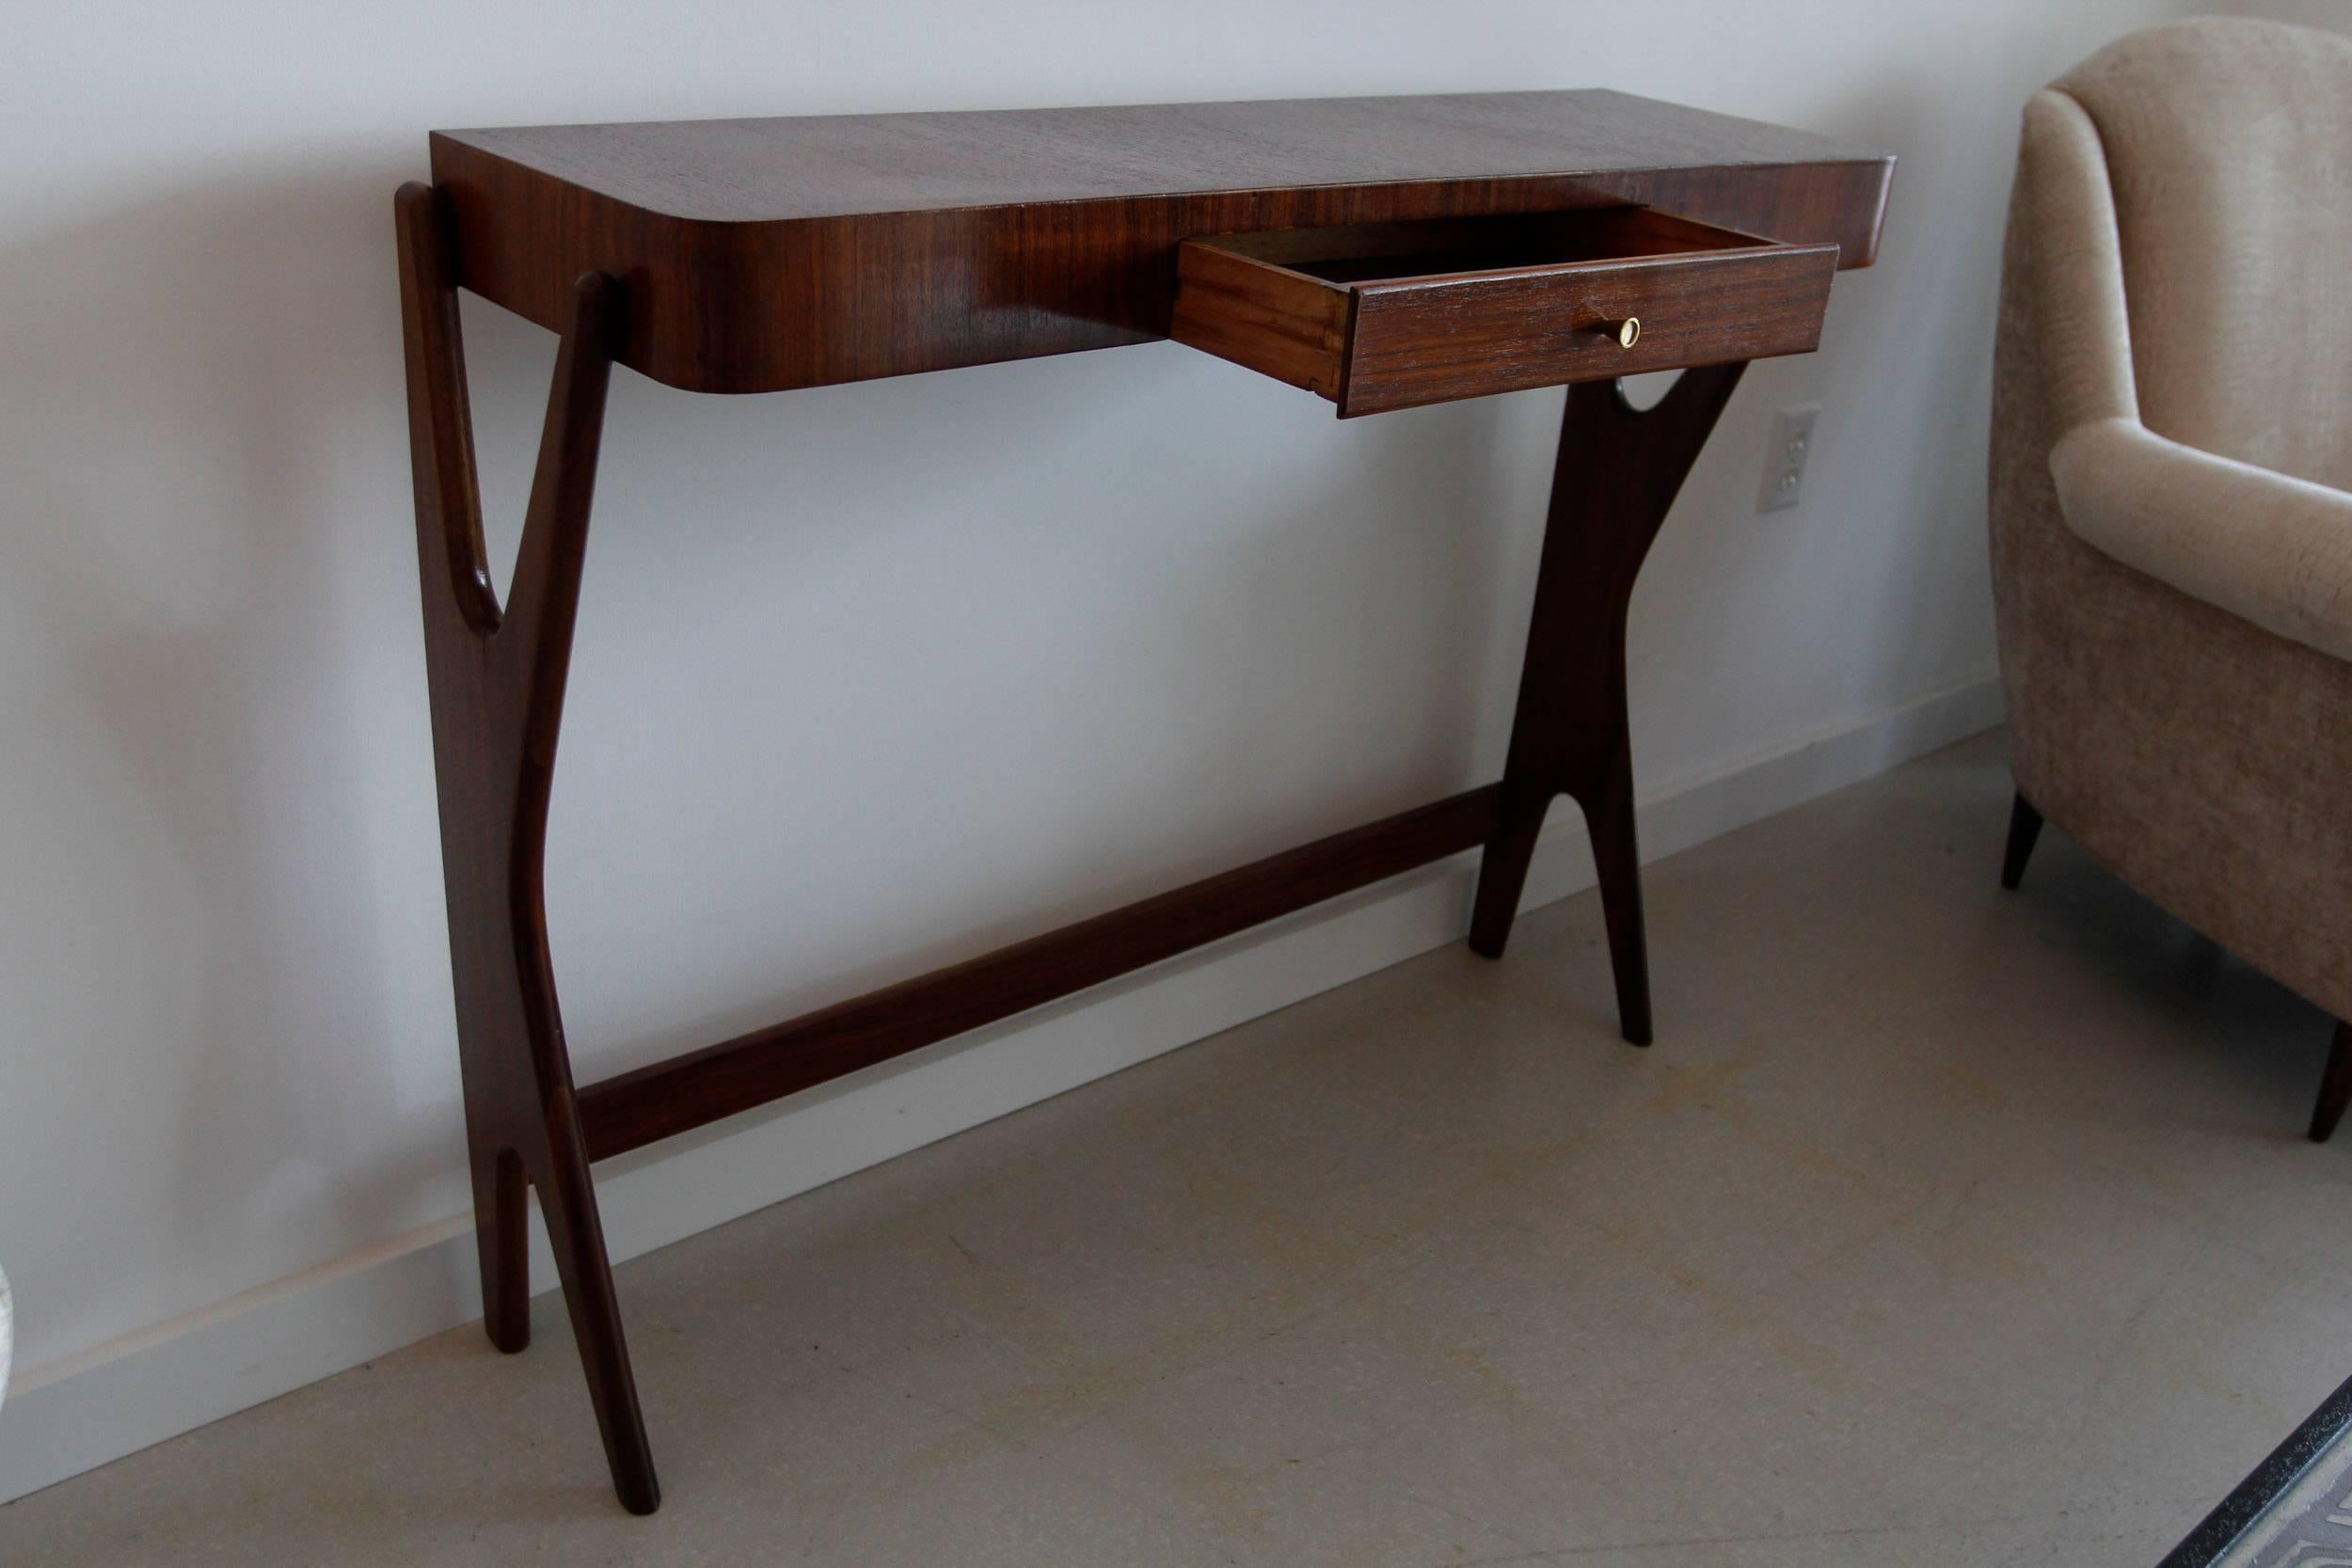 Mid-Century Modern Italian free-form wood console table slim in profile with a single drawer.